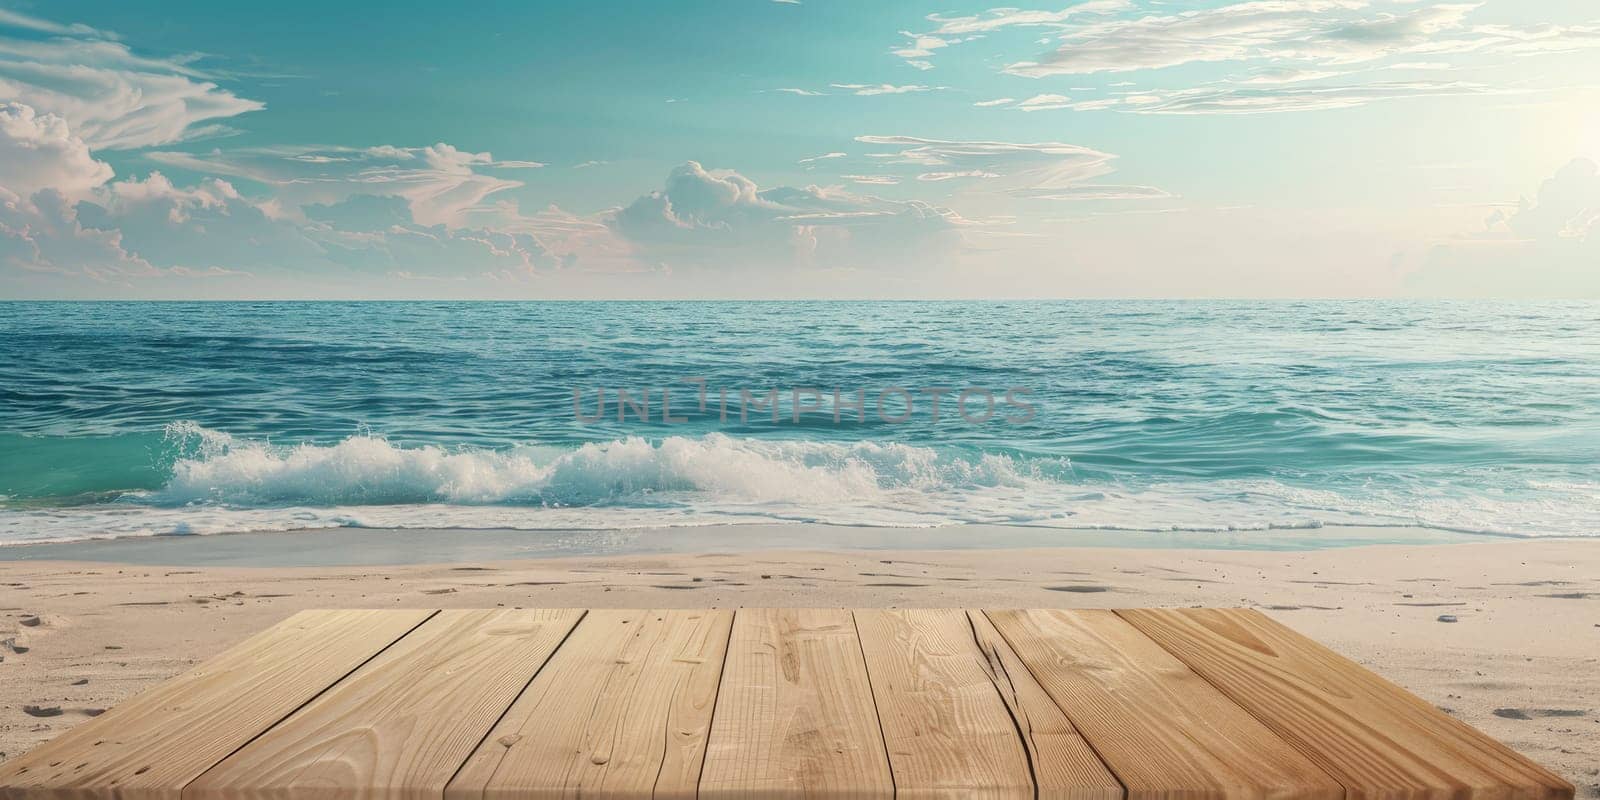 A wooden board is on the beach next to the ocean. The ocean is calm and the sky is blue